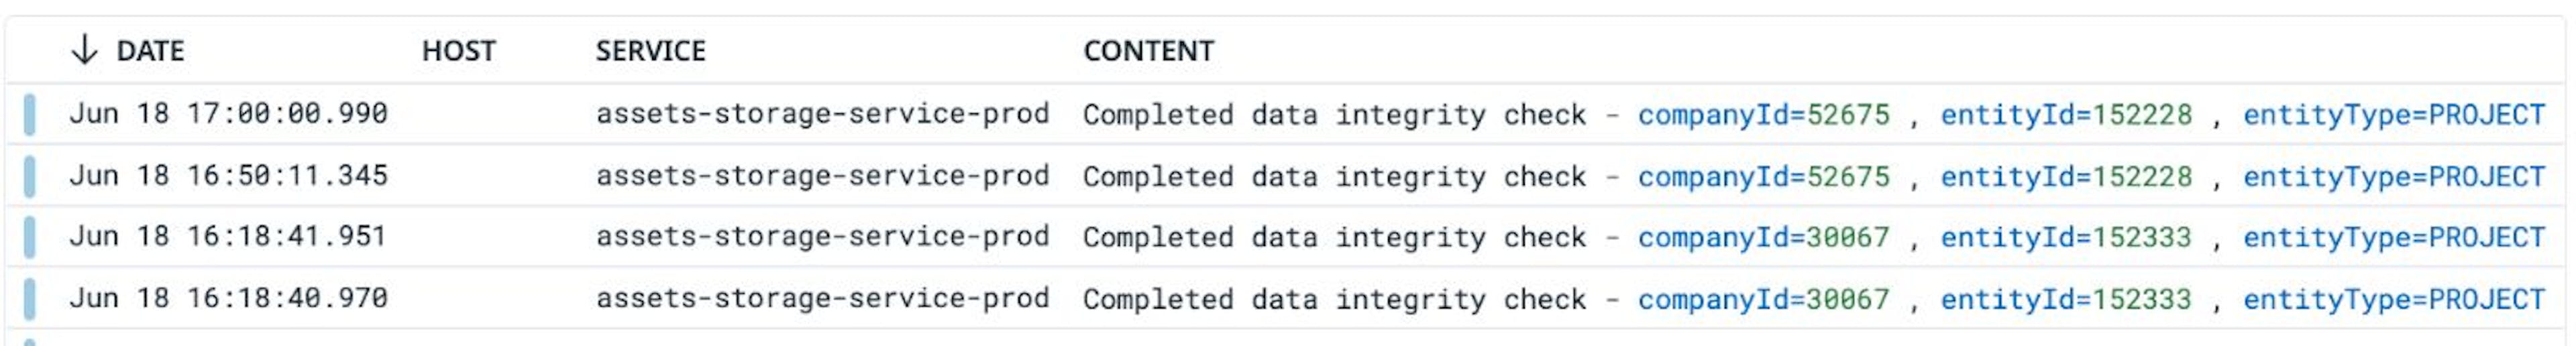 Datadog logs UI with logs that use the suggested hierarchical approach